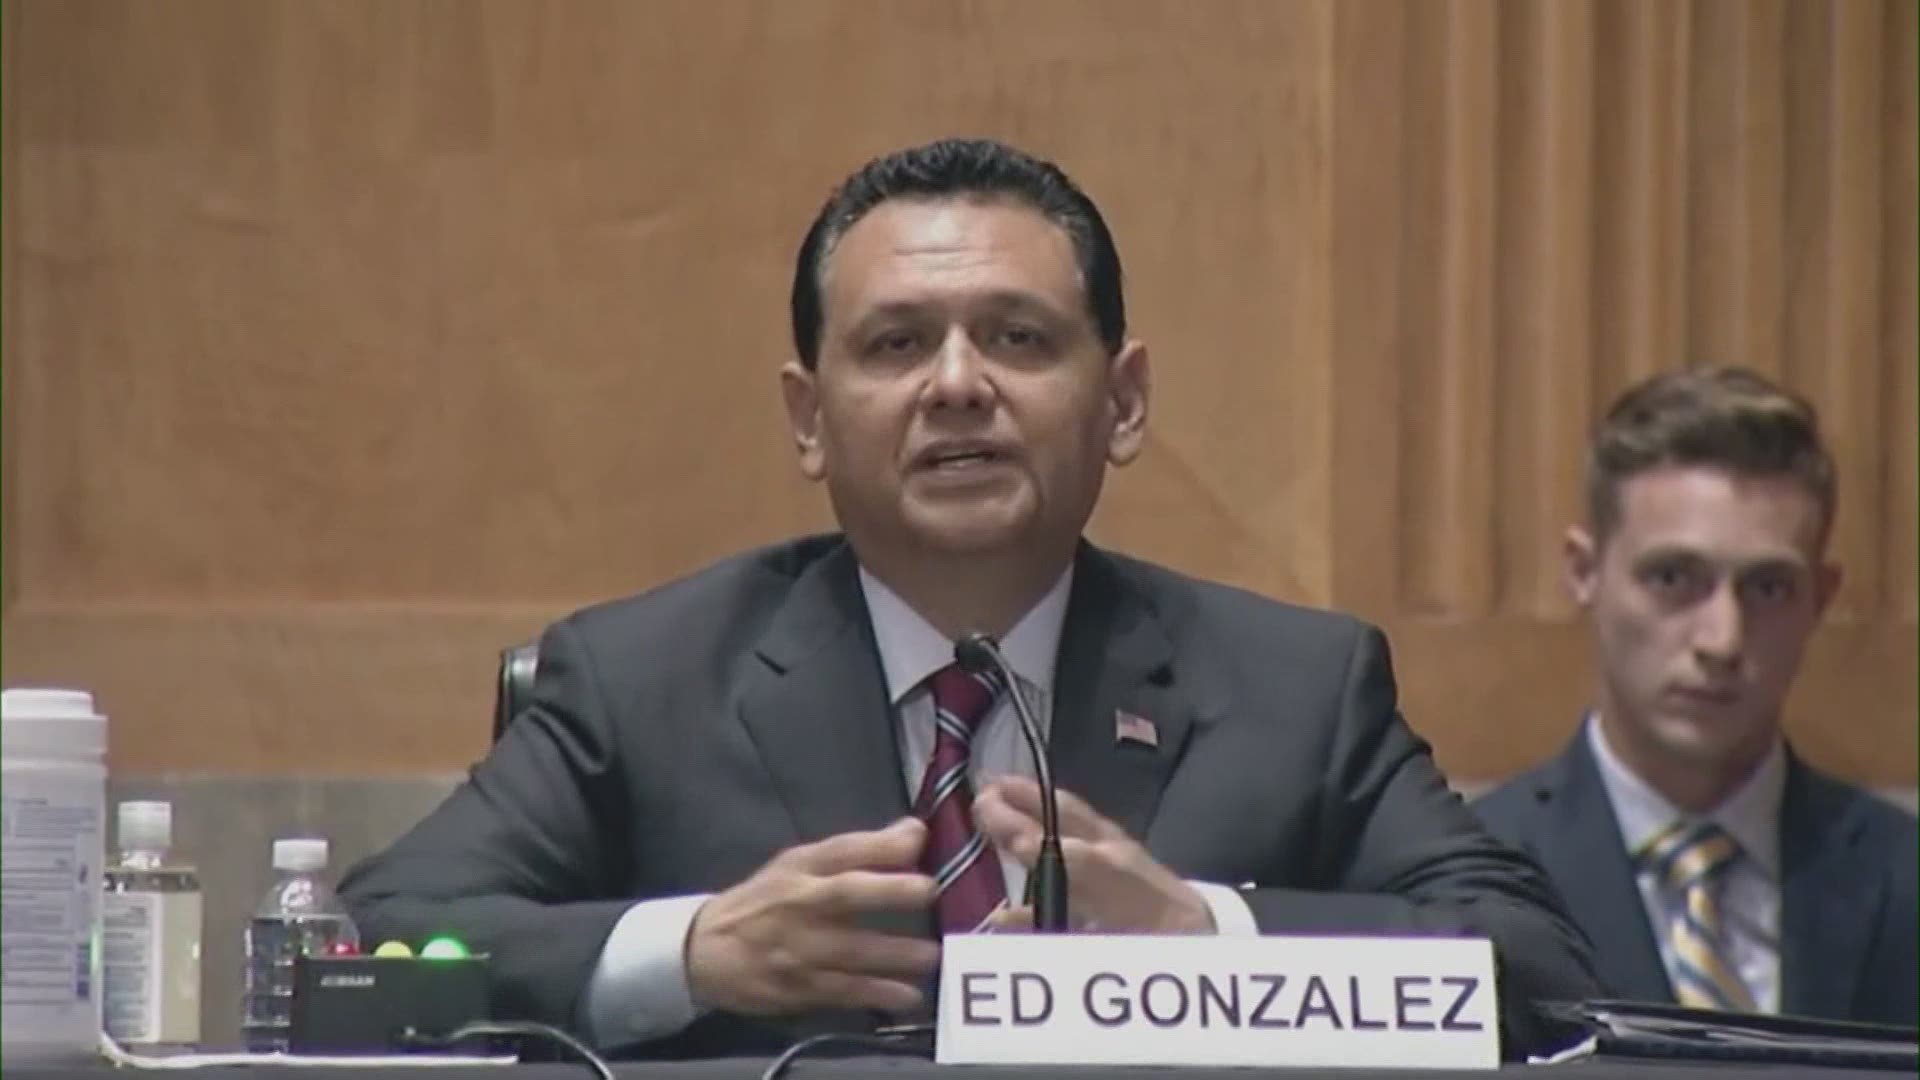 Harris County Sheriff Ed Gonzalez testified before the U.S. Senate for a confirmation hearing on his nomination to lead Immigration and Customs Enforcement.